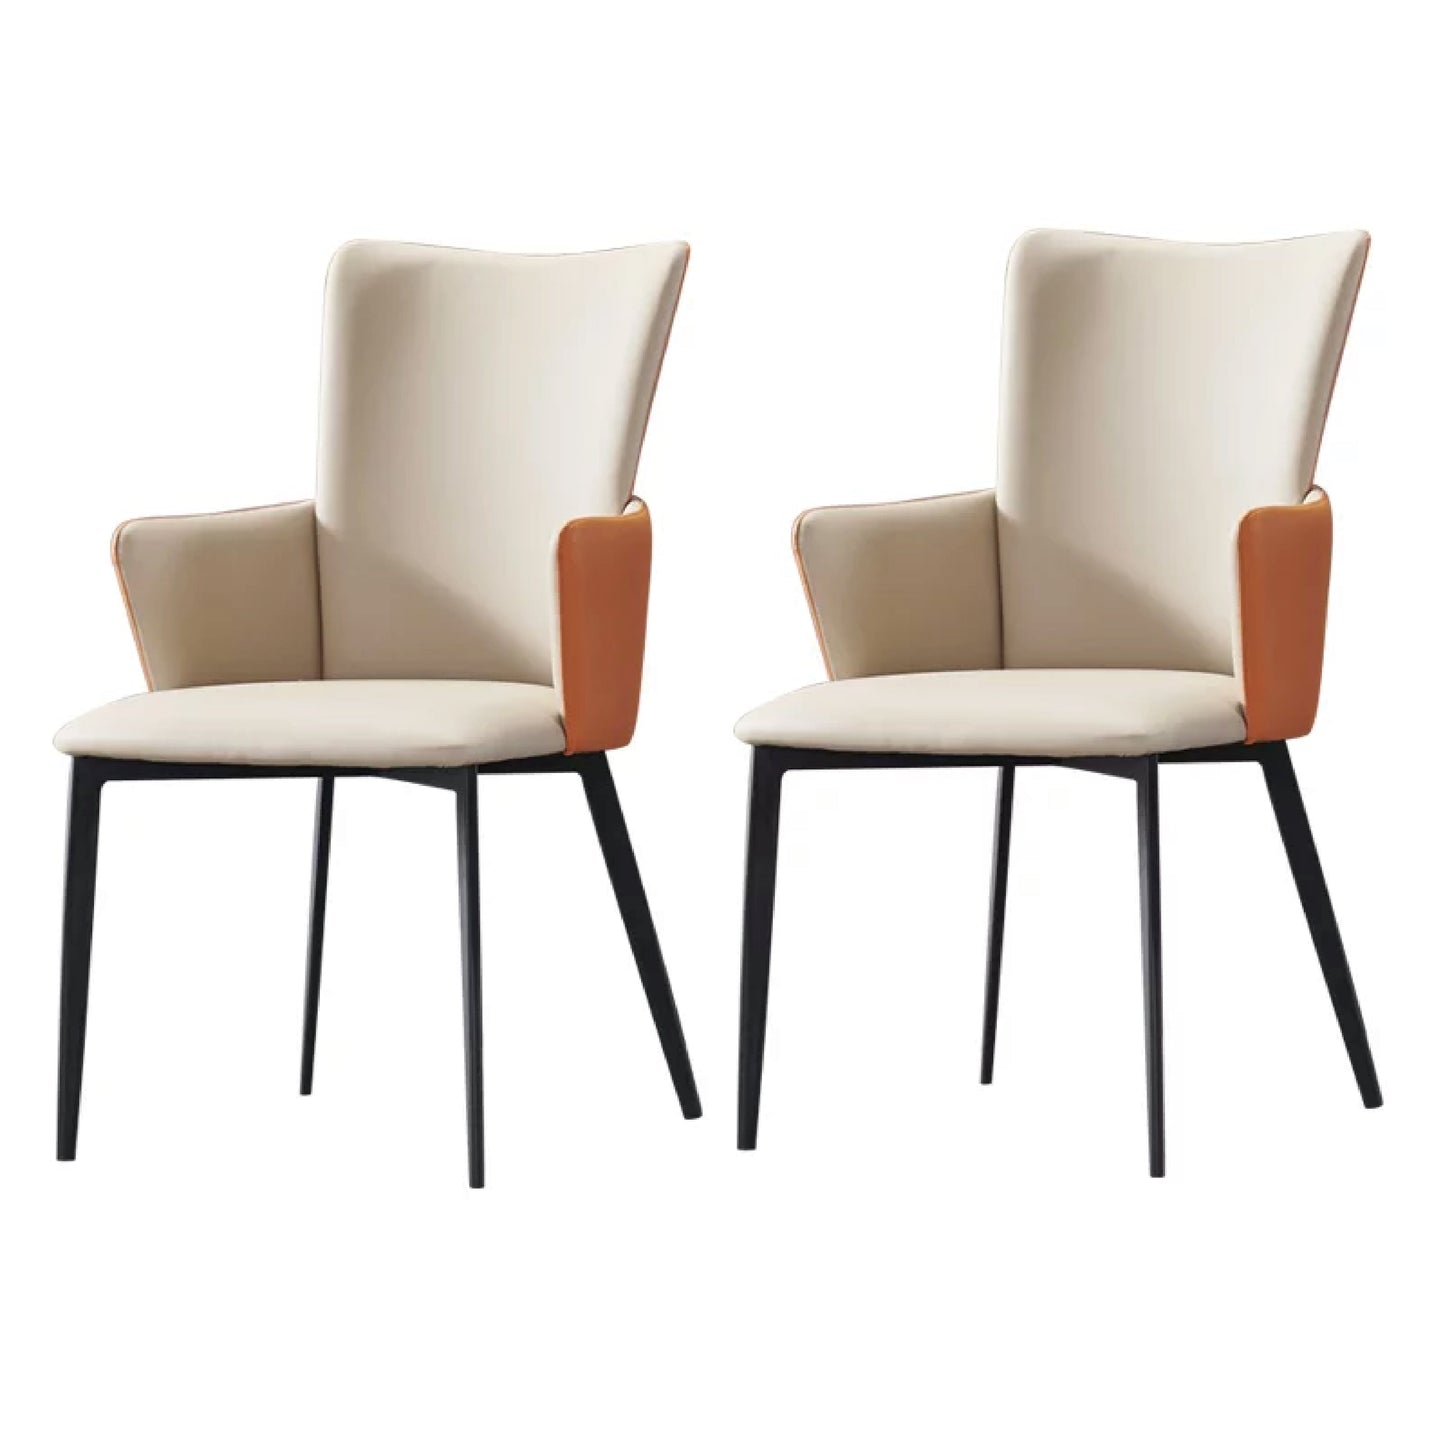 Wally Steel Art Arm Dining Chairs (Set of 2) – Made to order